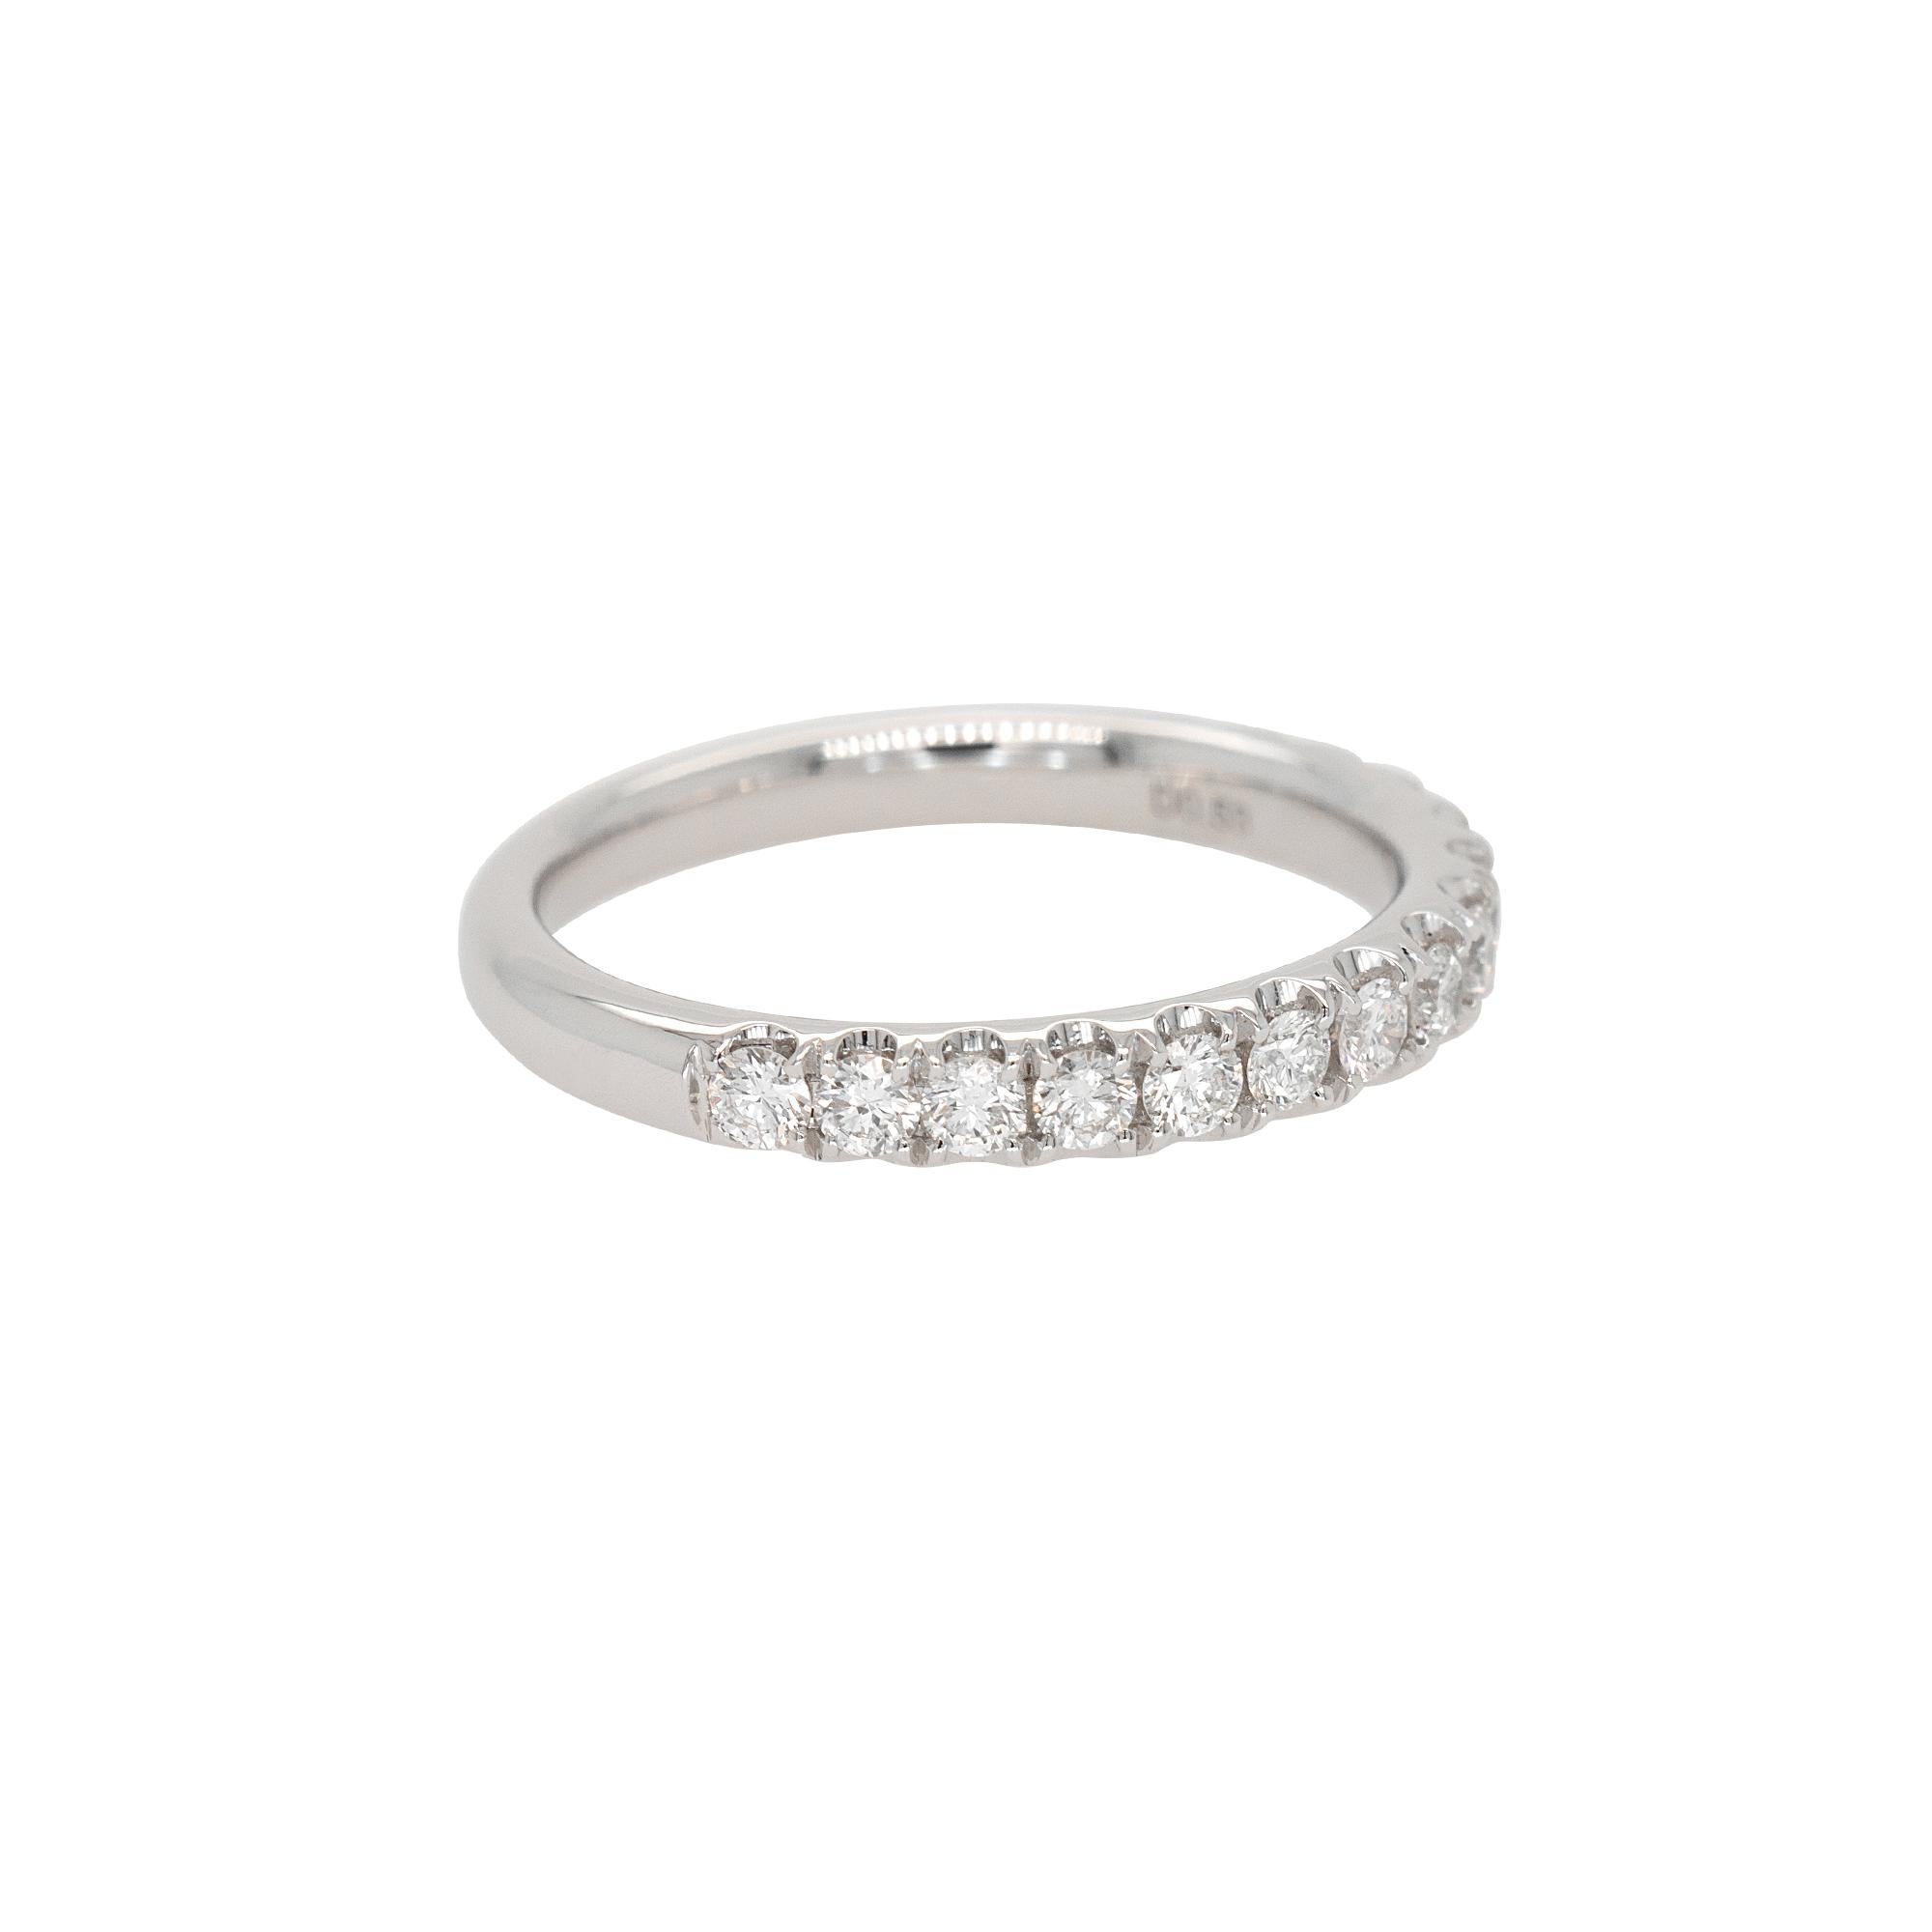 Diamond Details:
0.53ct Round Brilliant Natural Diamond
G Color VS Clarity
Ring Material: 18k White Gold
Ring Size: 6.25 (can be sized)
Total Weight: 3.3g (2.1dwt)
This item comes with a presentation box!
SKU: A30317334

A timeless expression of